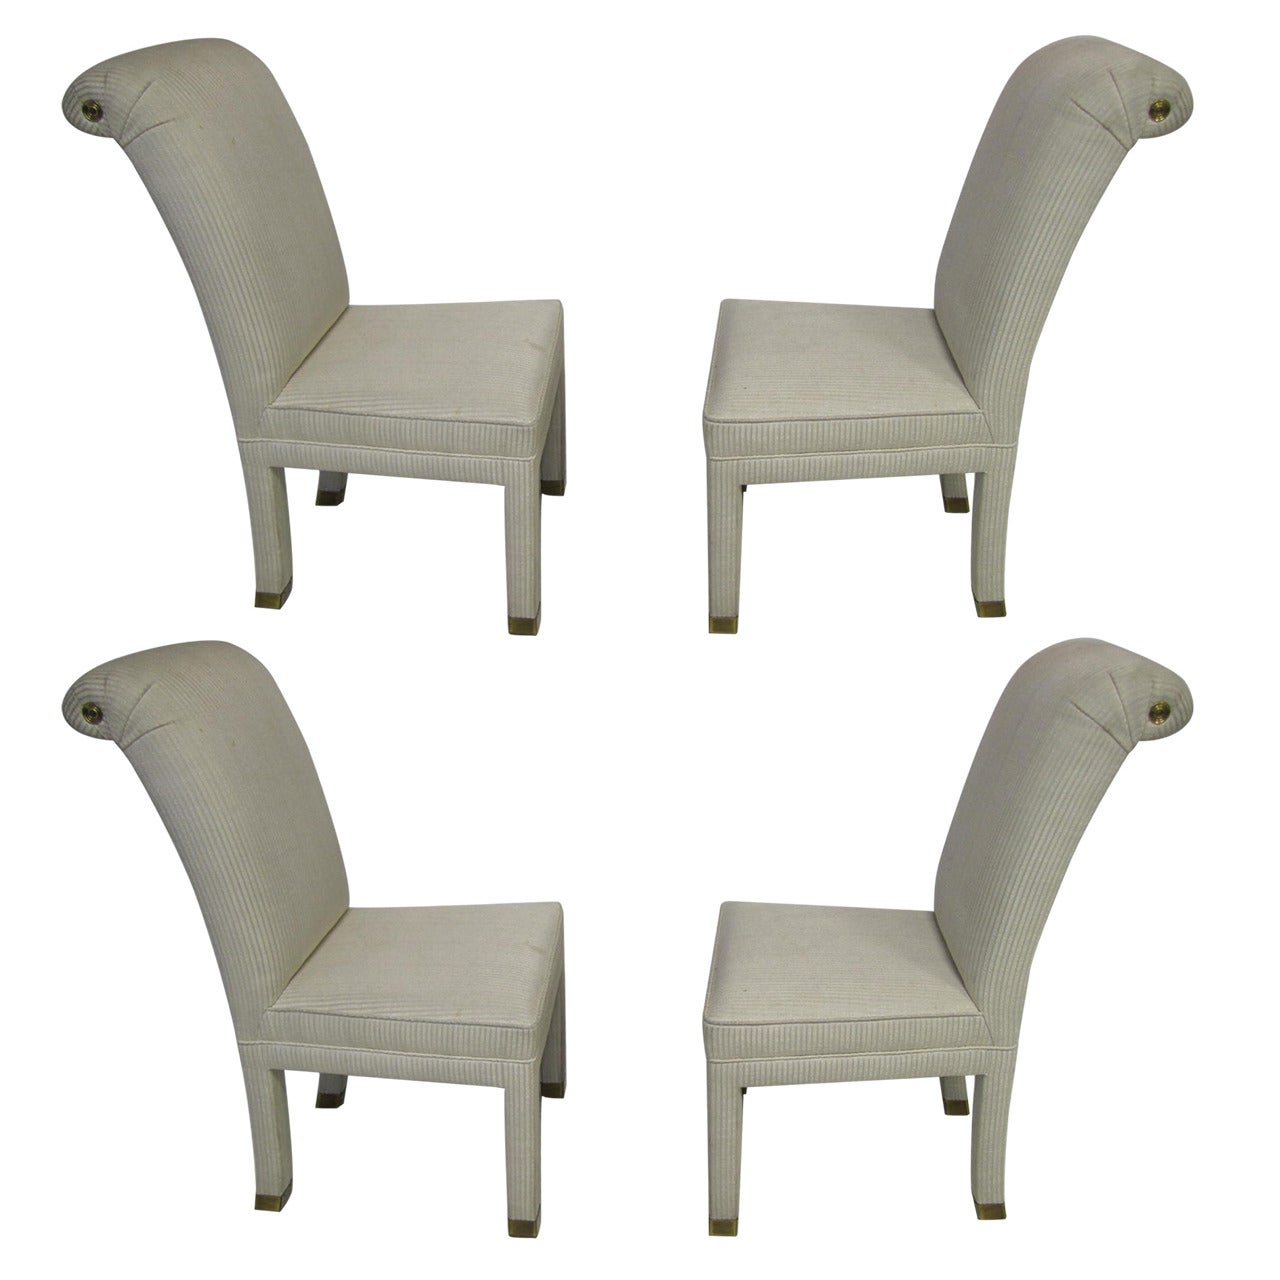 Four Mastercraft Upholstered and Brass Dining Chairs, Mid-Century Modern